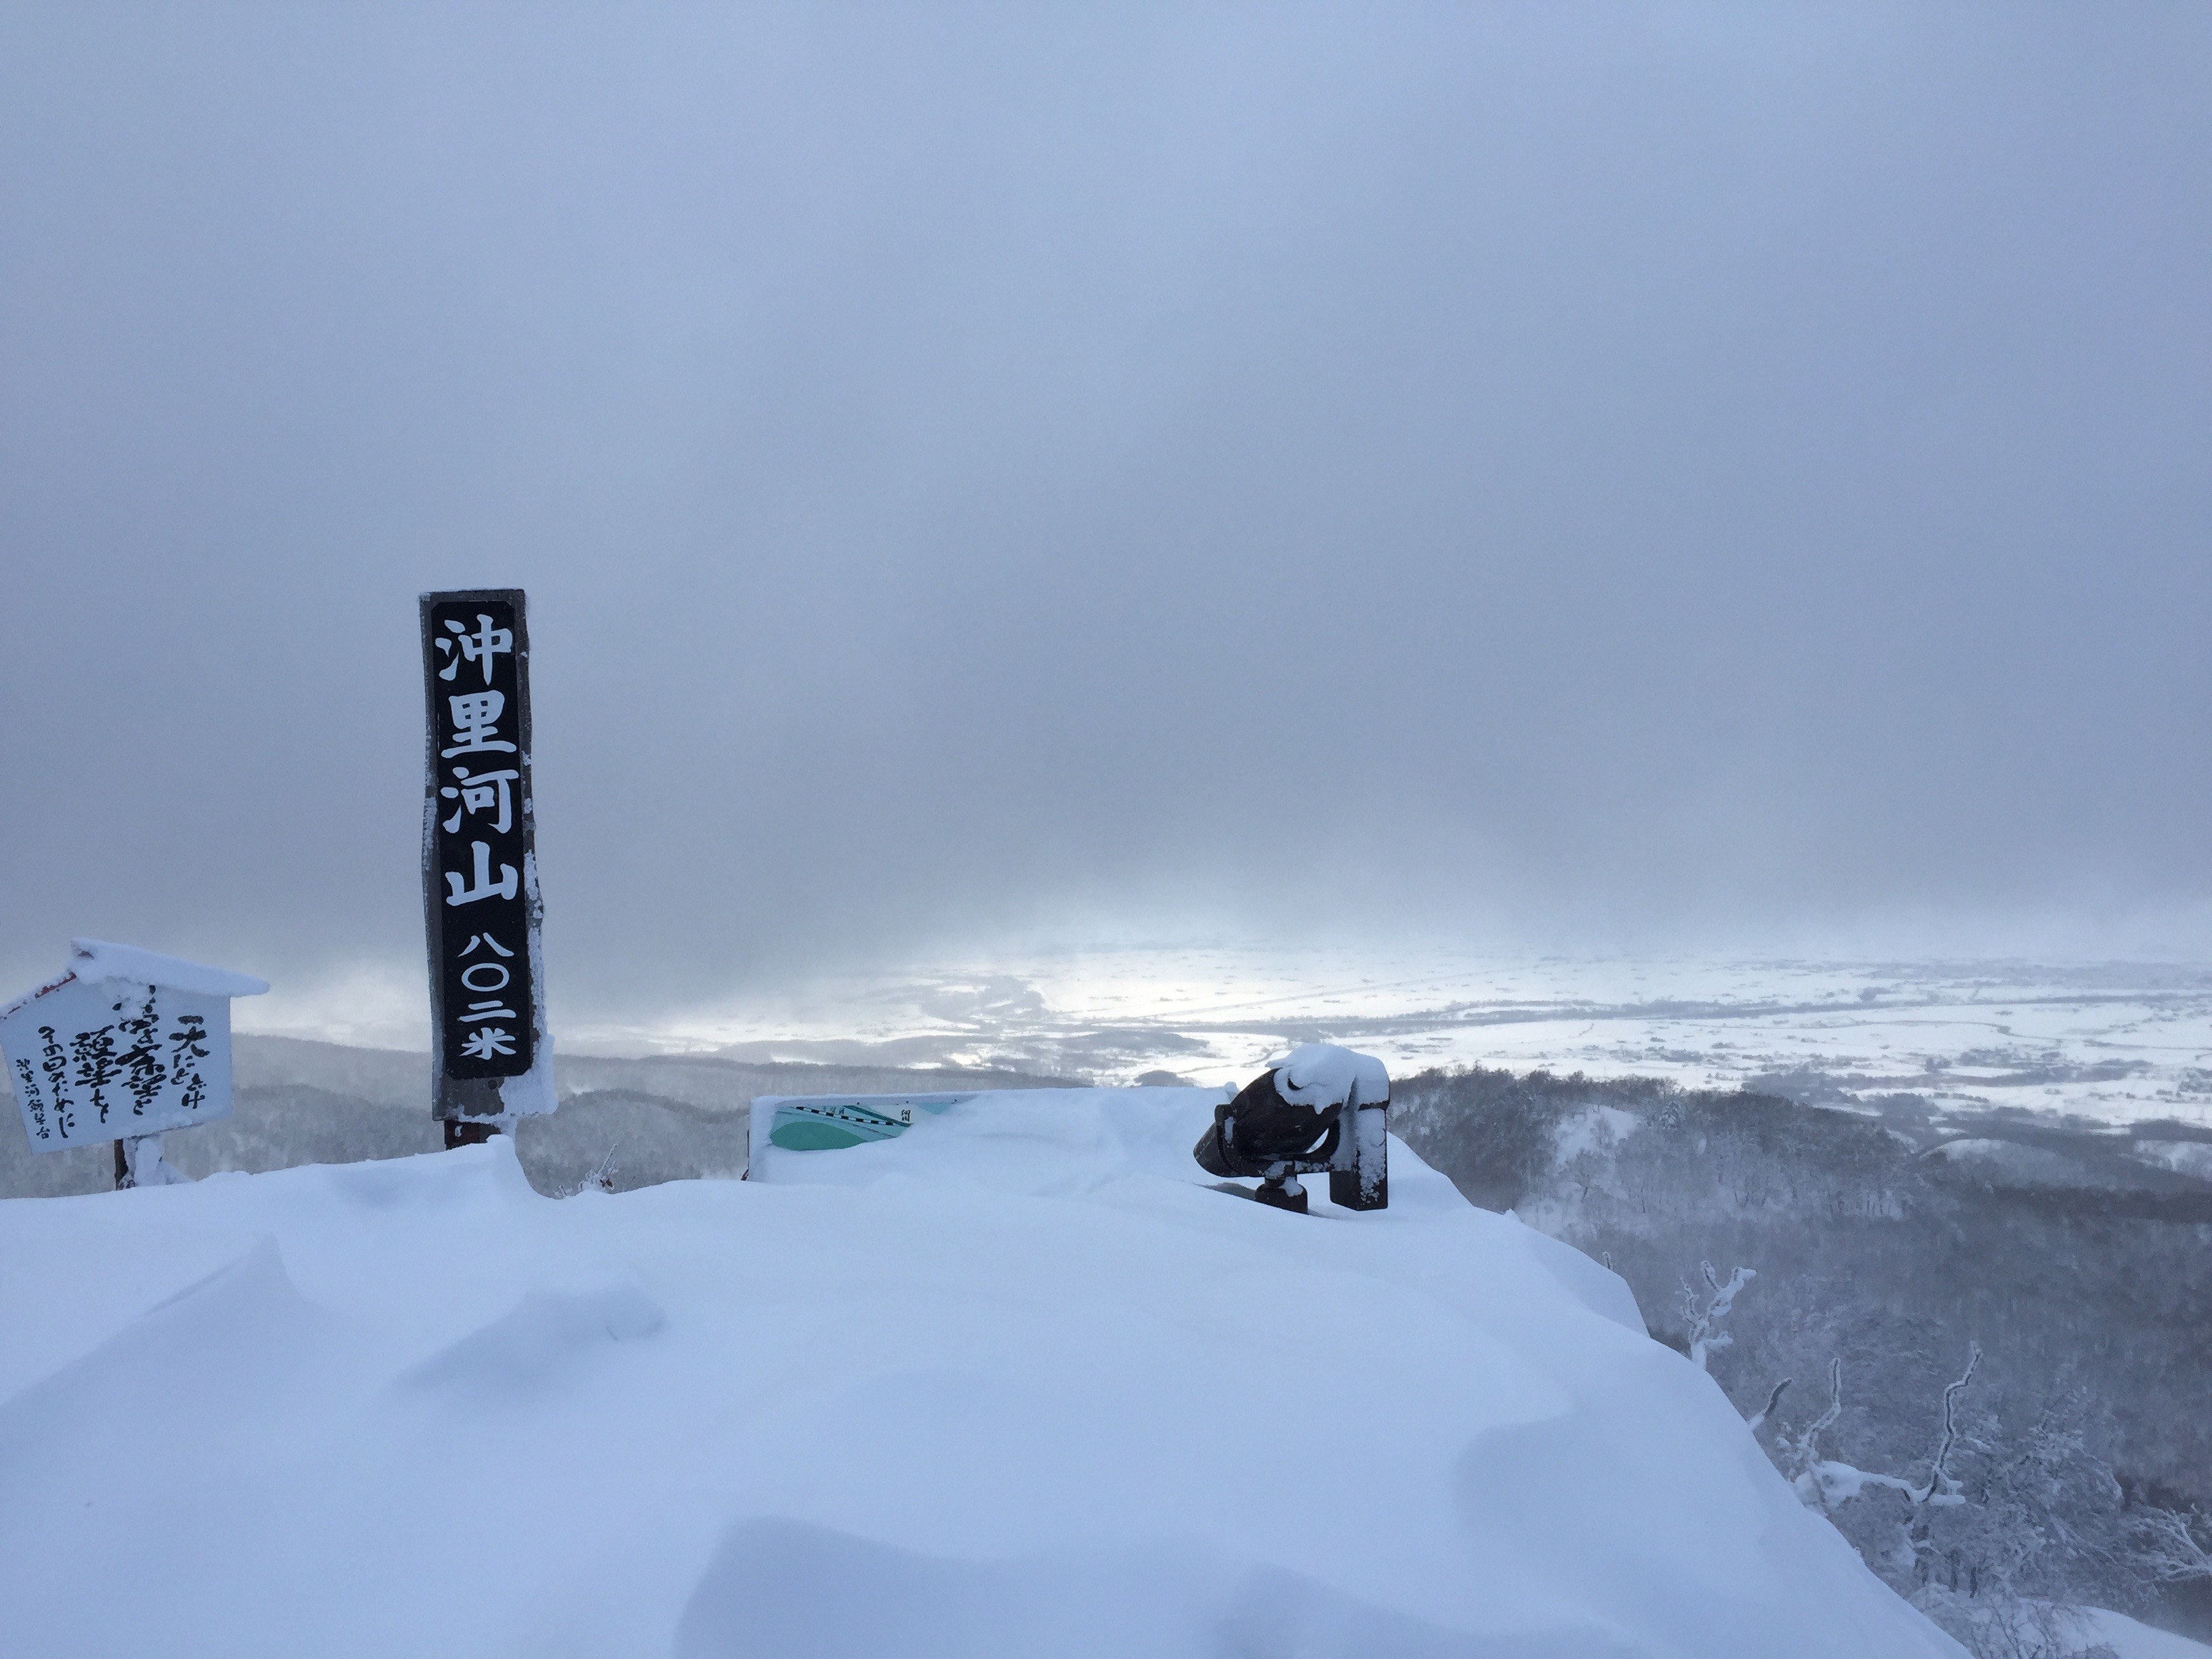 A cloudy view from the summit of Okirika-yama, with almost everything but the summit marker covered in windswept snow